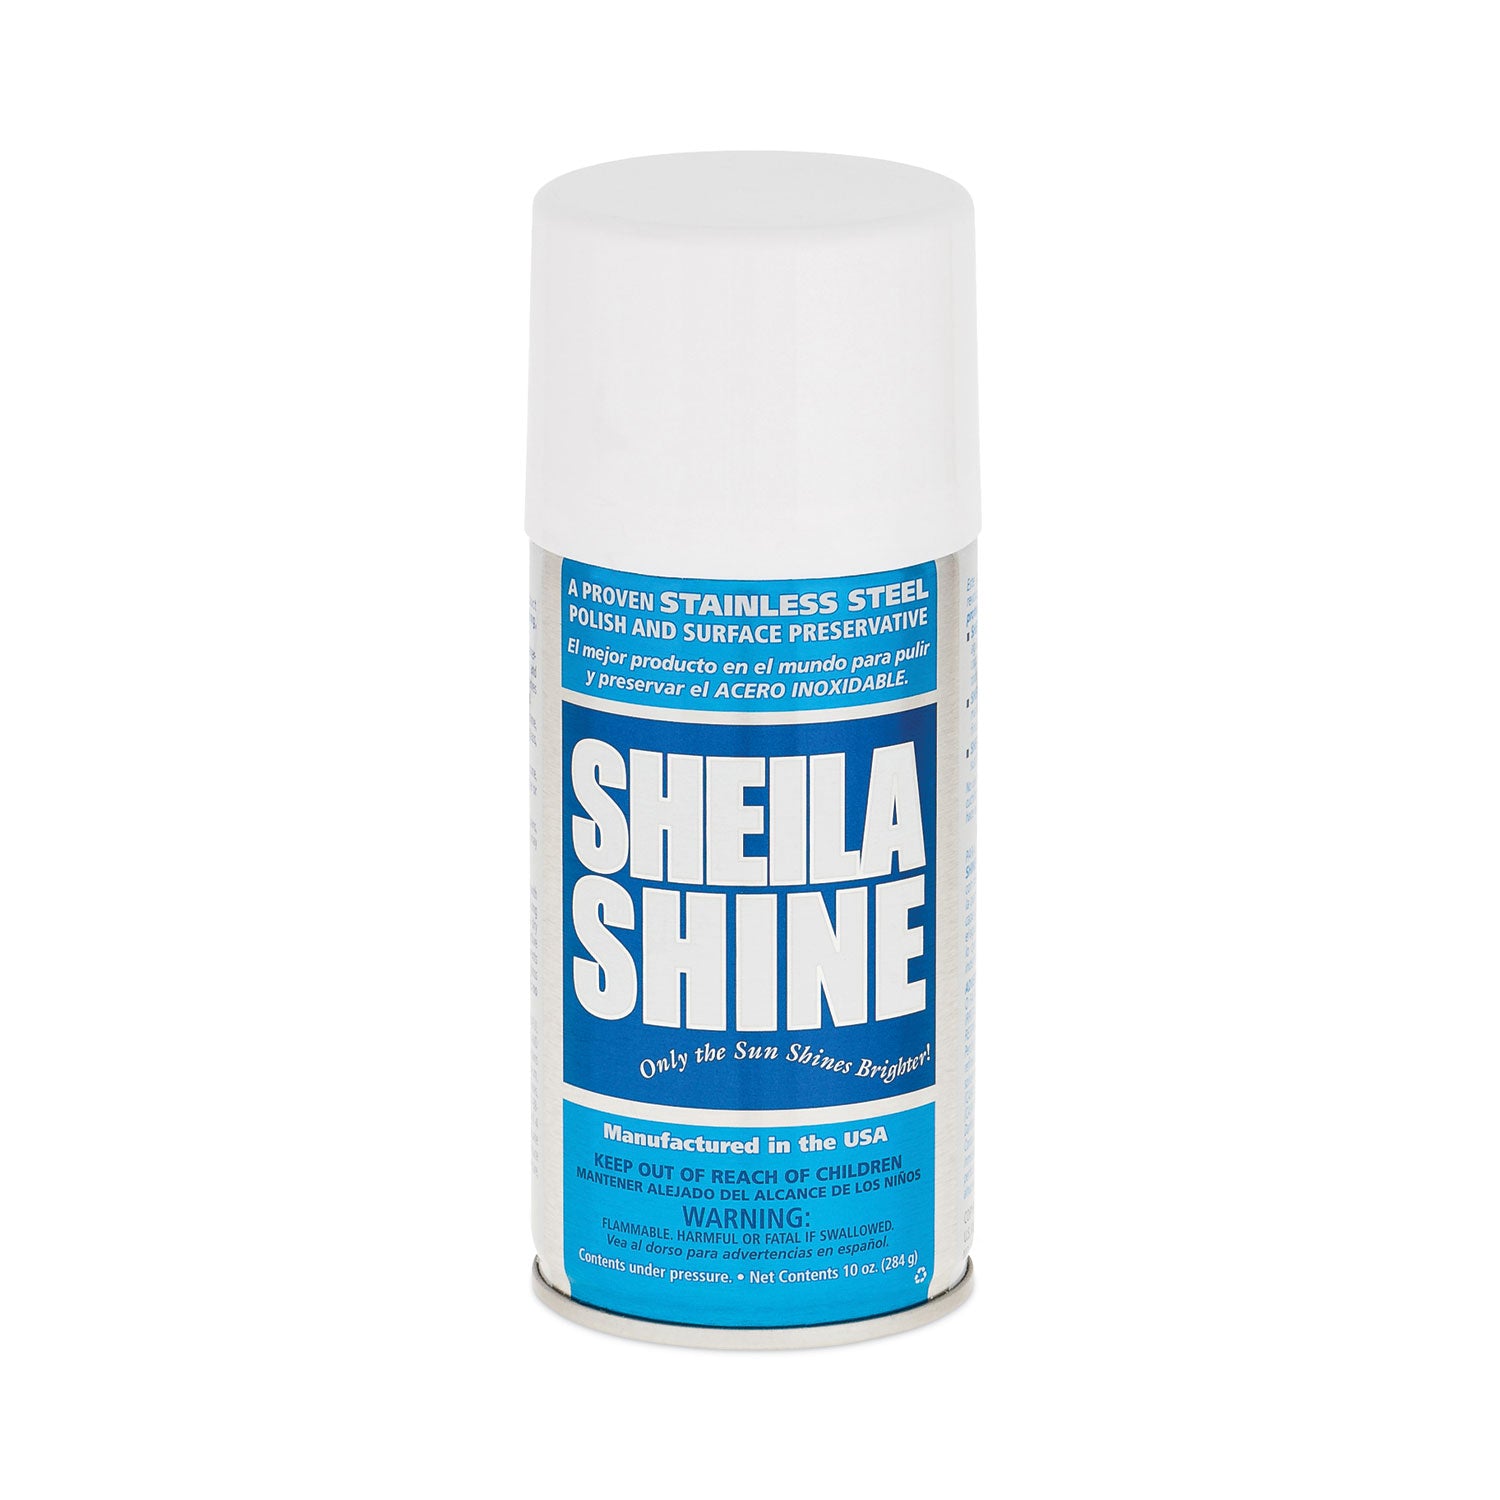 Stainless Steel Cleaner and Polish, 10 oz Aerosol Spray - 